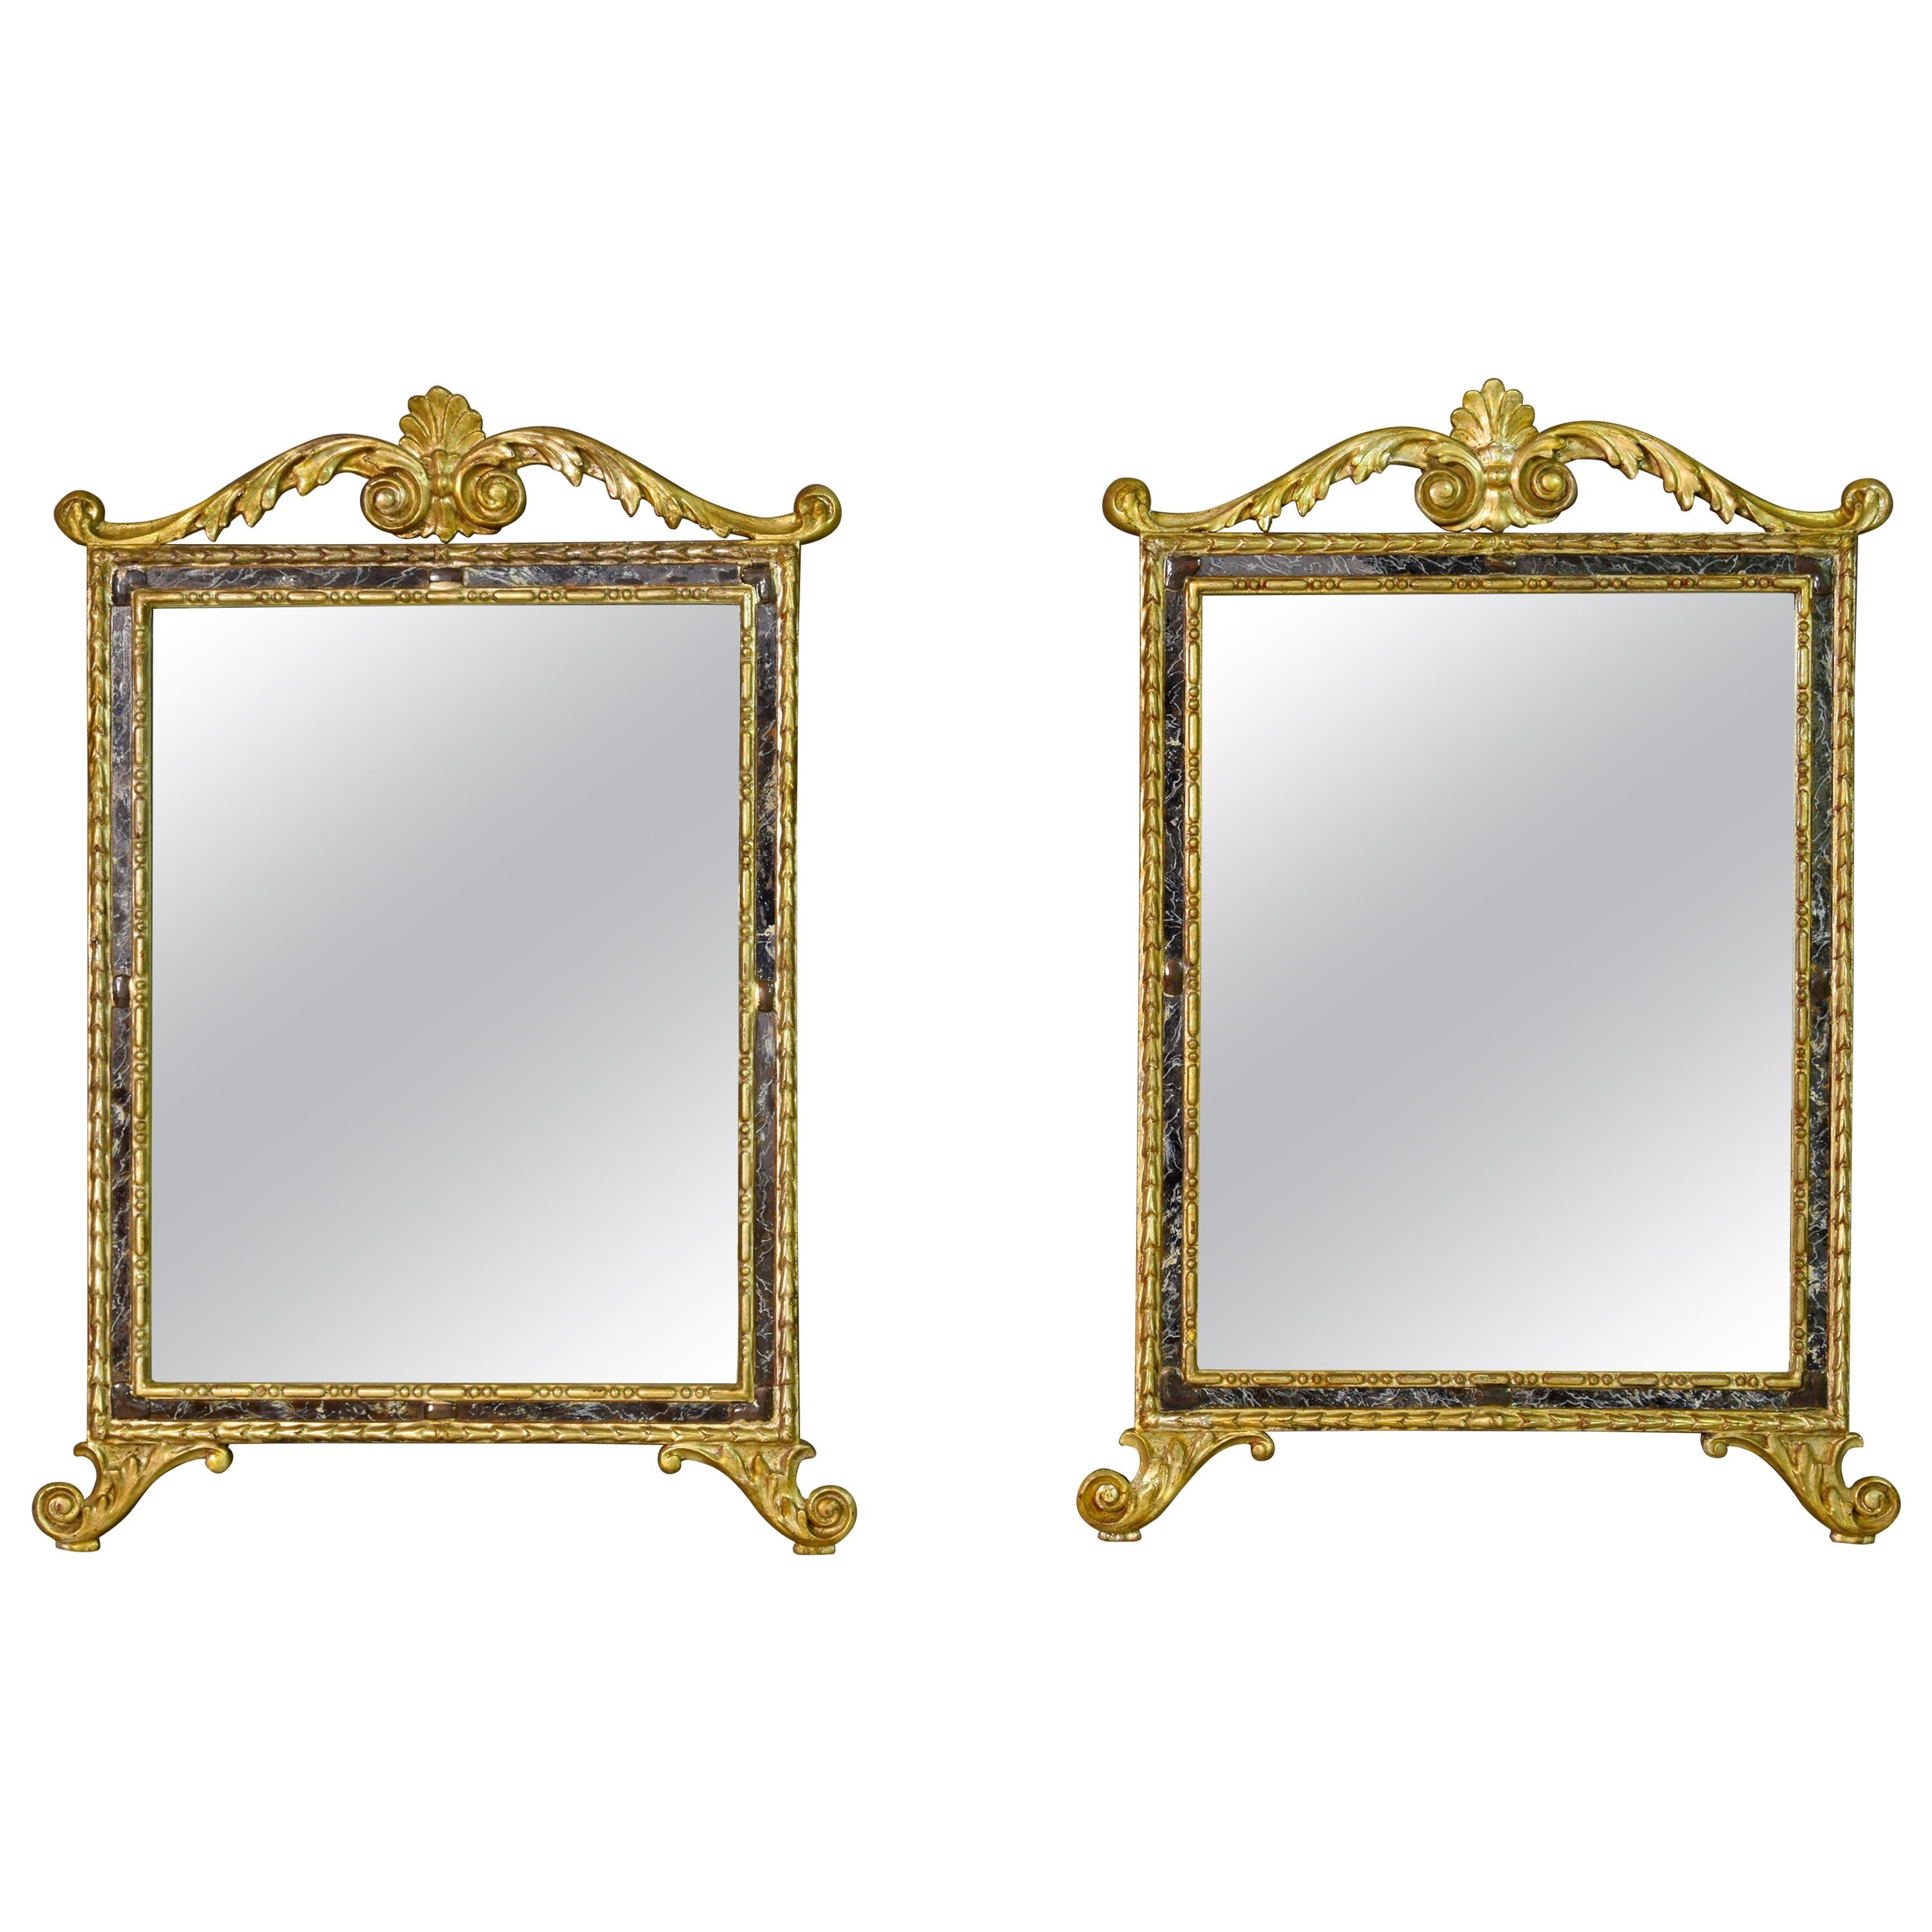 18th Century, Pair of Italian Neoclassical Carved and Giltwood Mirrors